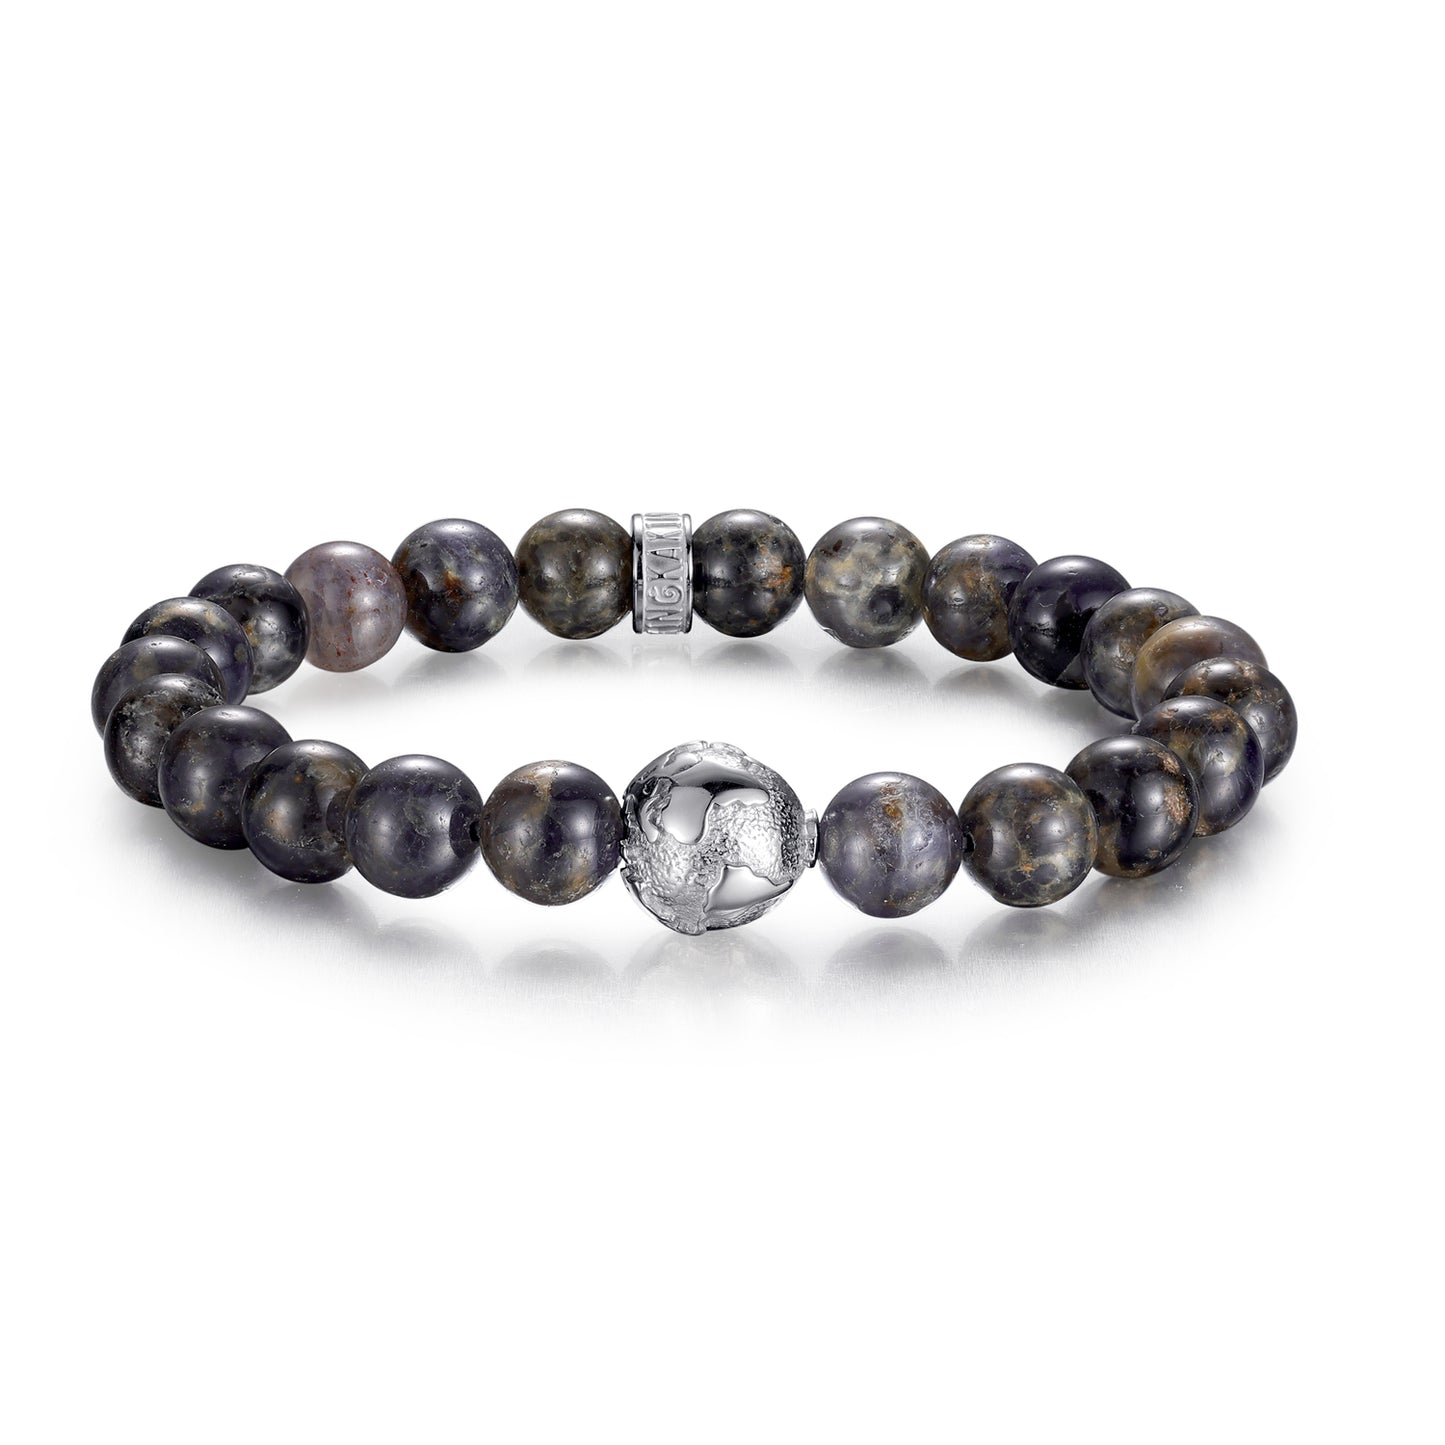 KINGKA Natural Cordierite Stone Bead Bracelet with 316 Stainless Steel Earth Accessory